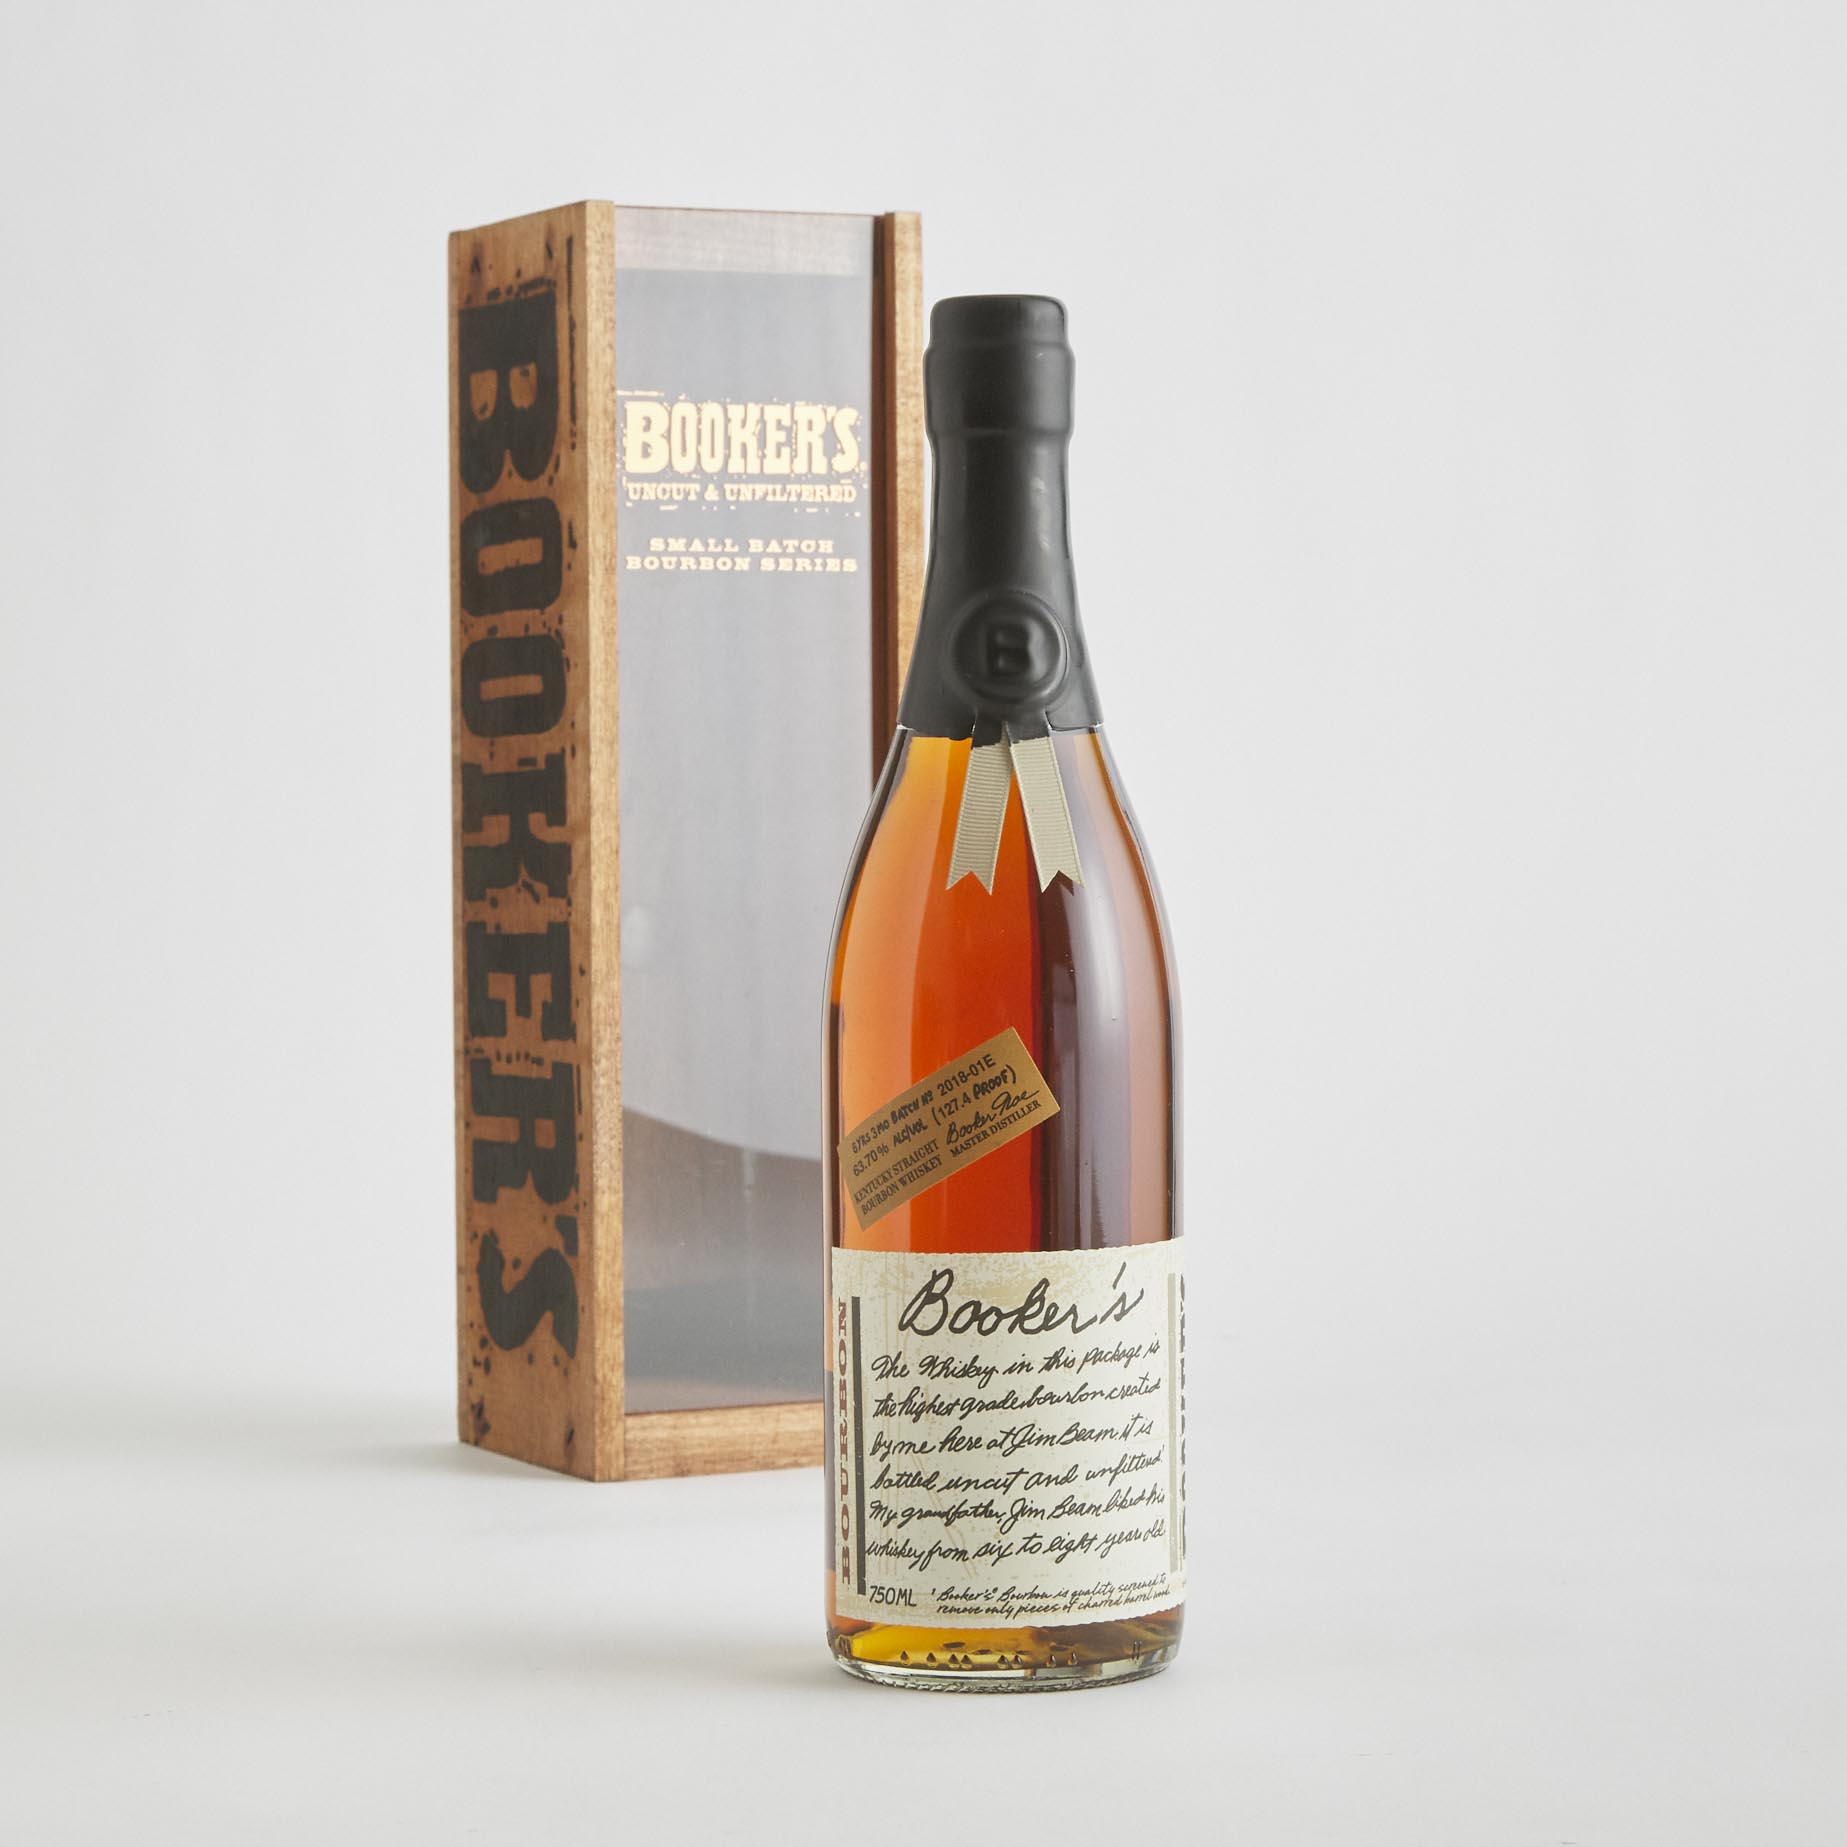 BOOKER’S SMALL BATCH KENTUCKY STRAIGHT BOURBON WHISKEY 6 YEARS 3 MONTHS (ONE 750 ML)